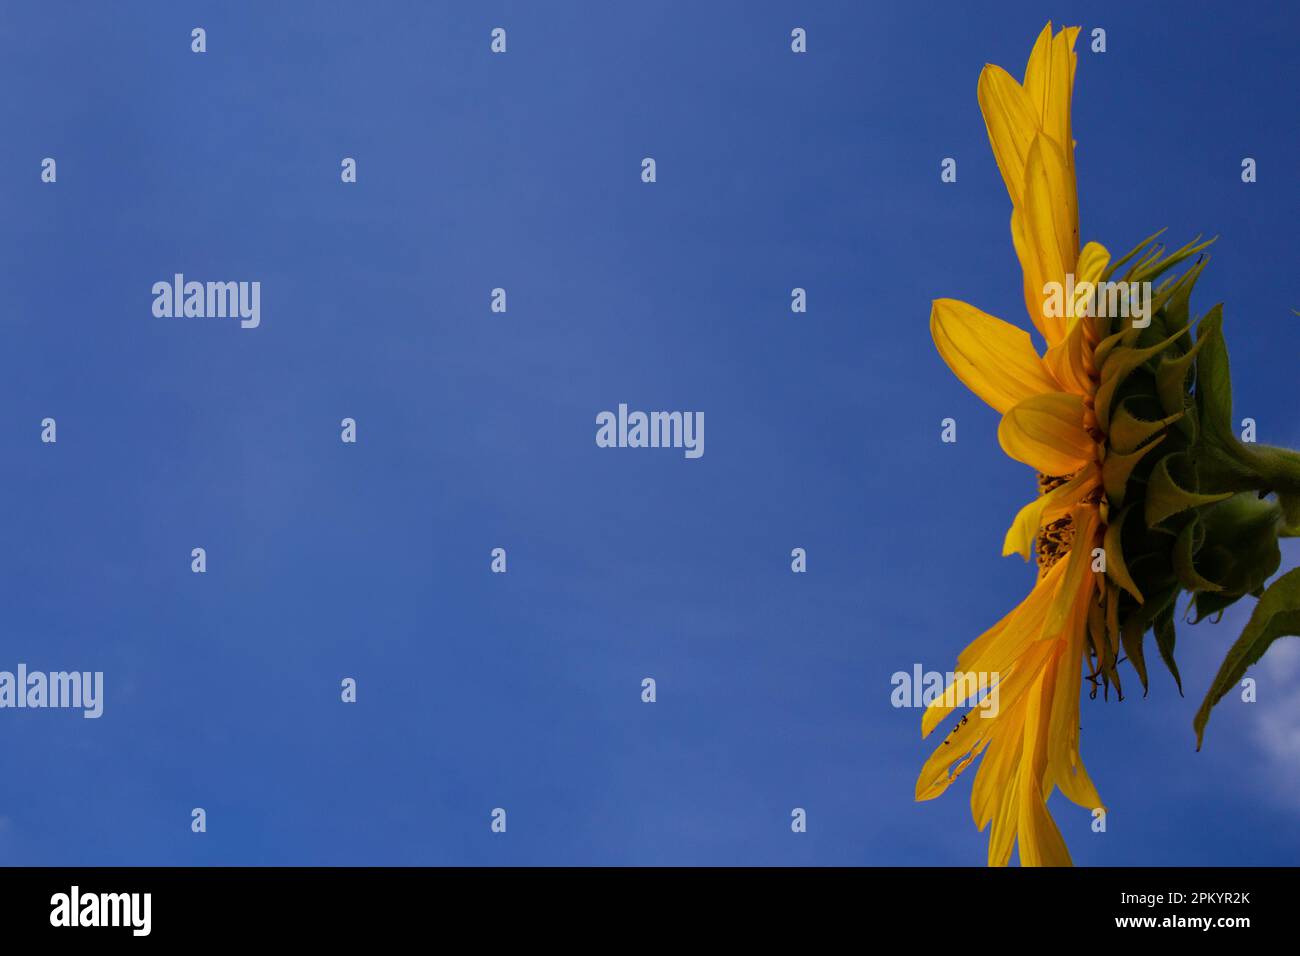 Goias, Goias, Brazil – April 06, 2023: Detail of a sunflower photographed in profile, with a blue sky in the background. Stock Photo